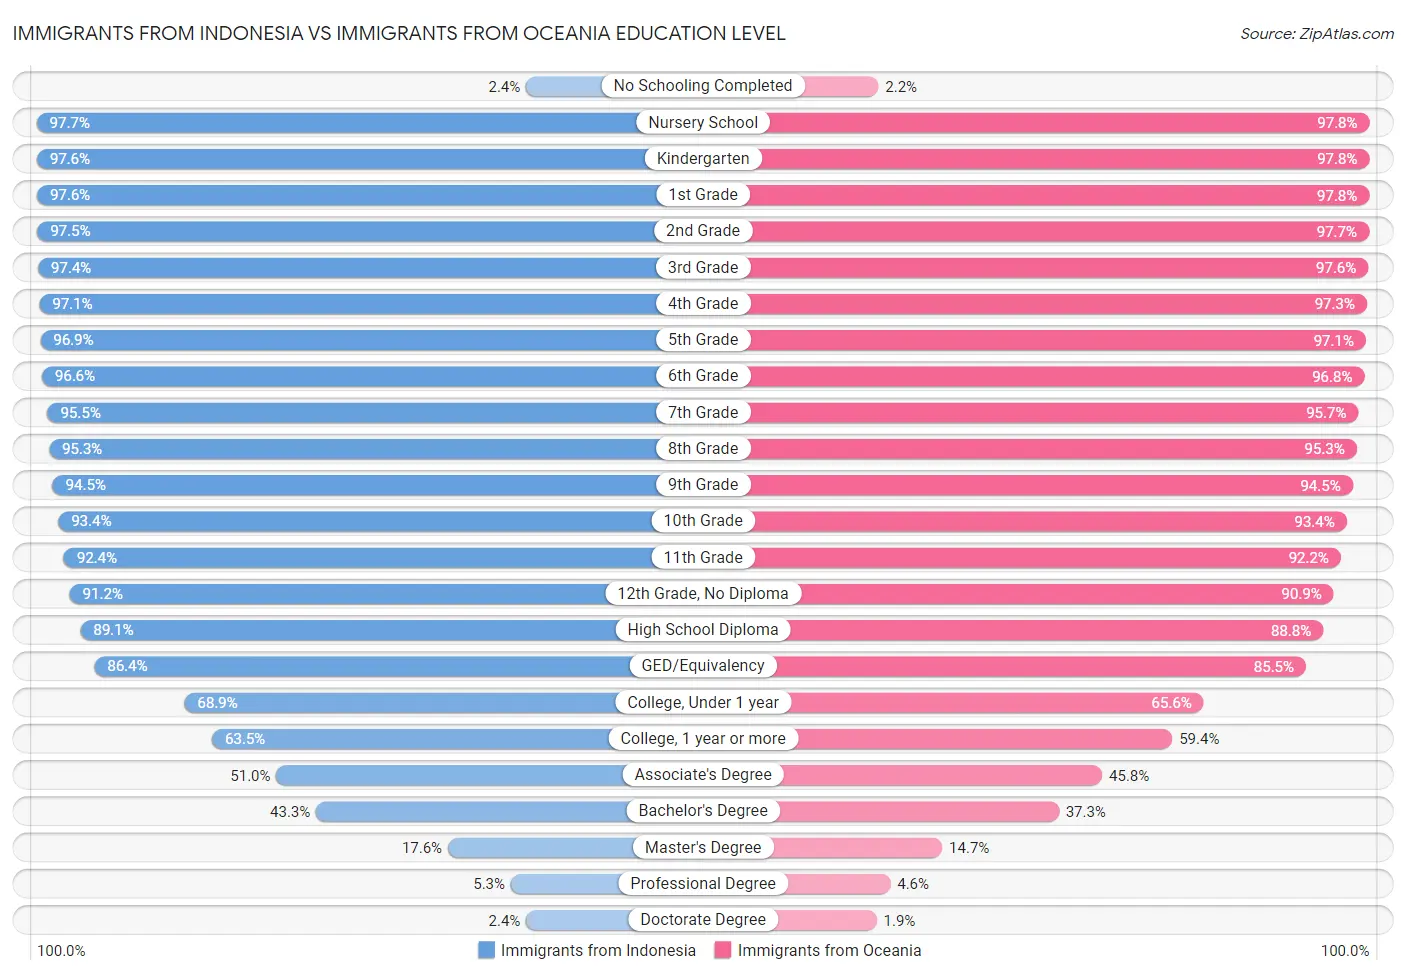 Immigrants from Indonesia vs Immigrants from Oceania Education Level